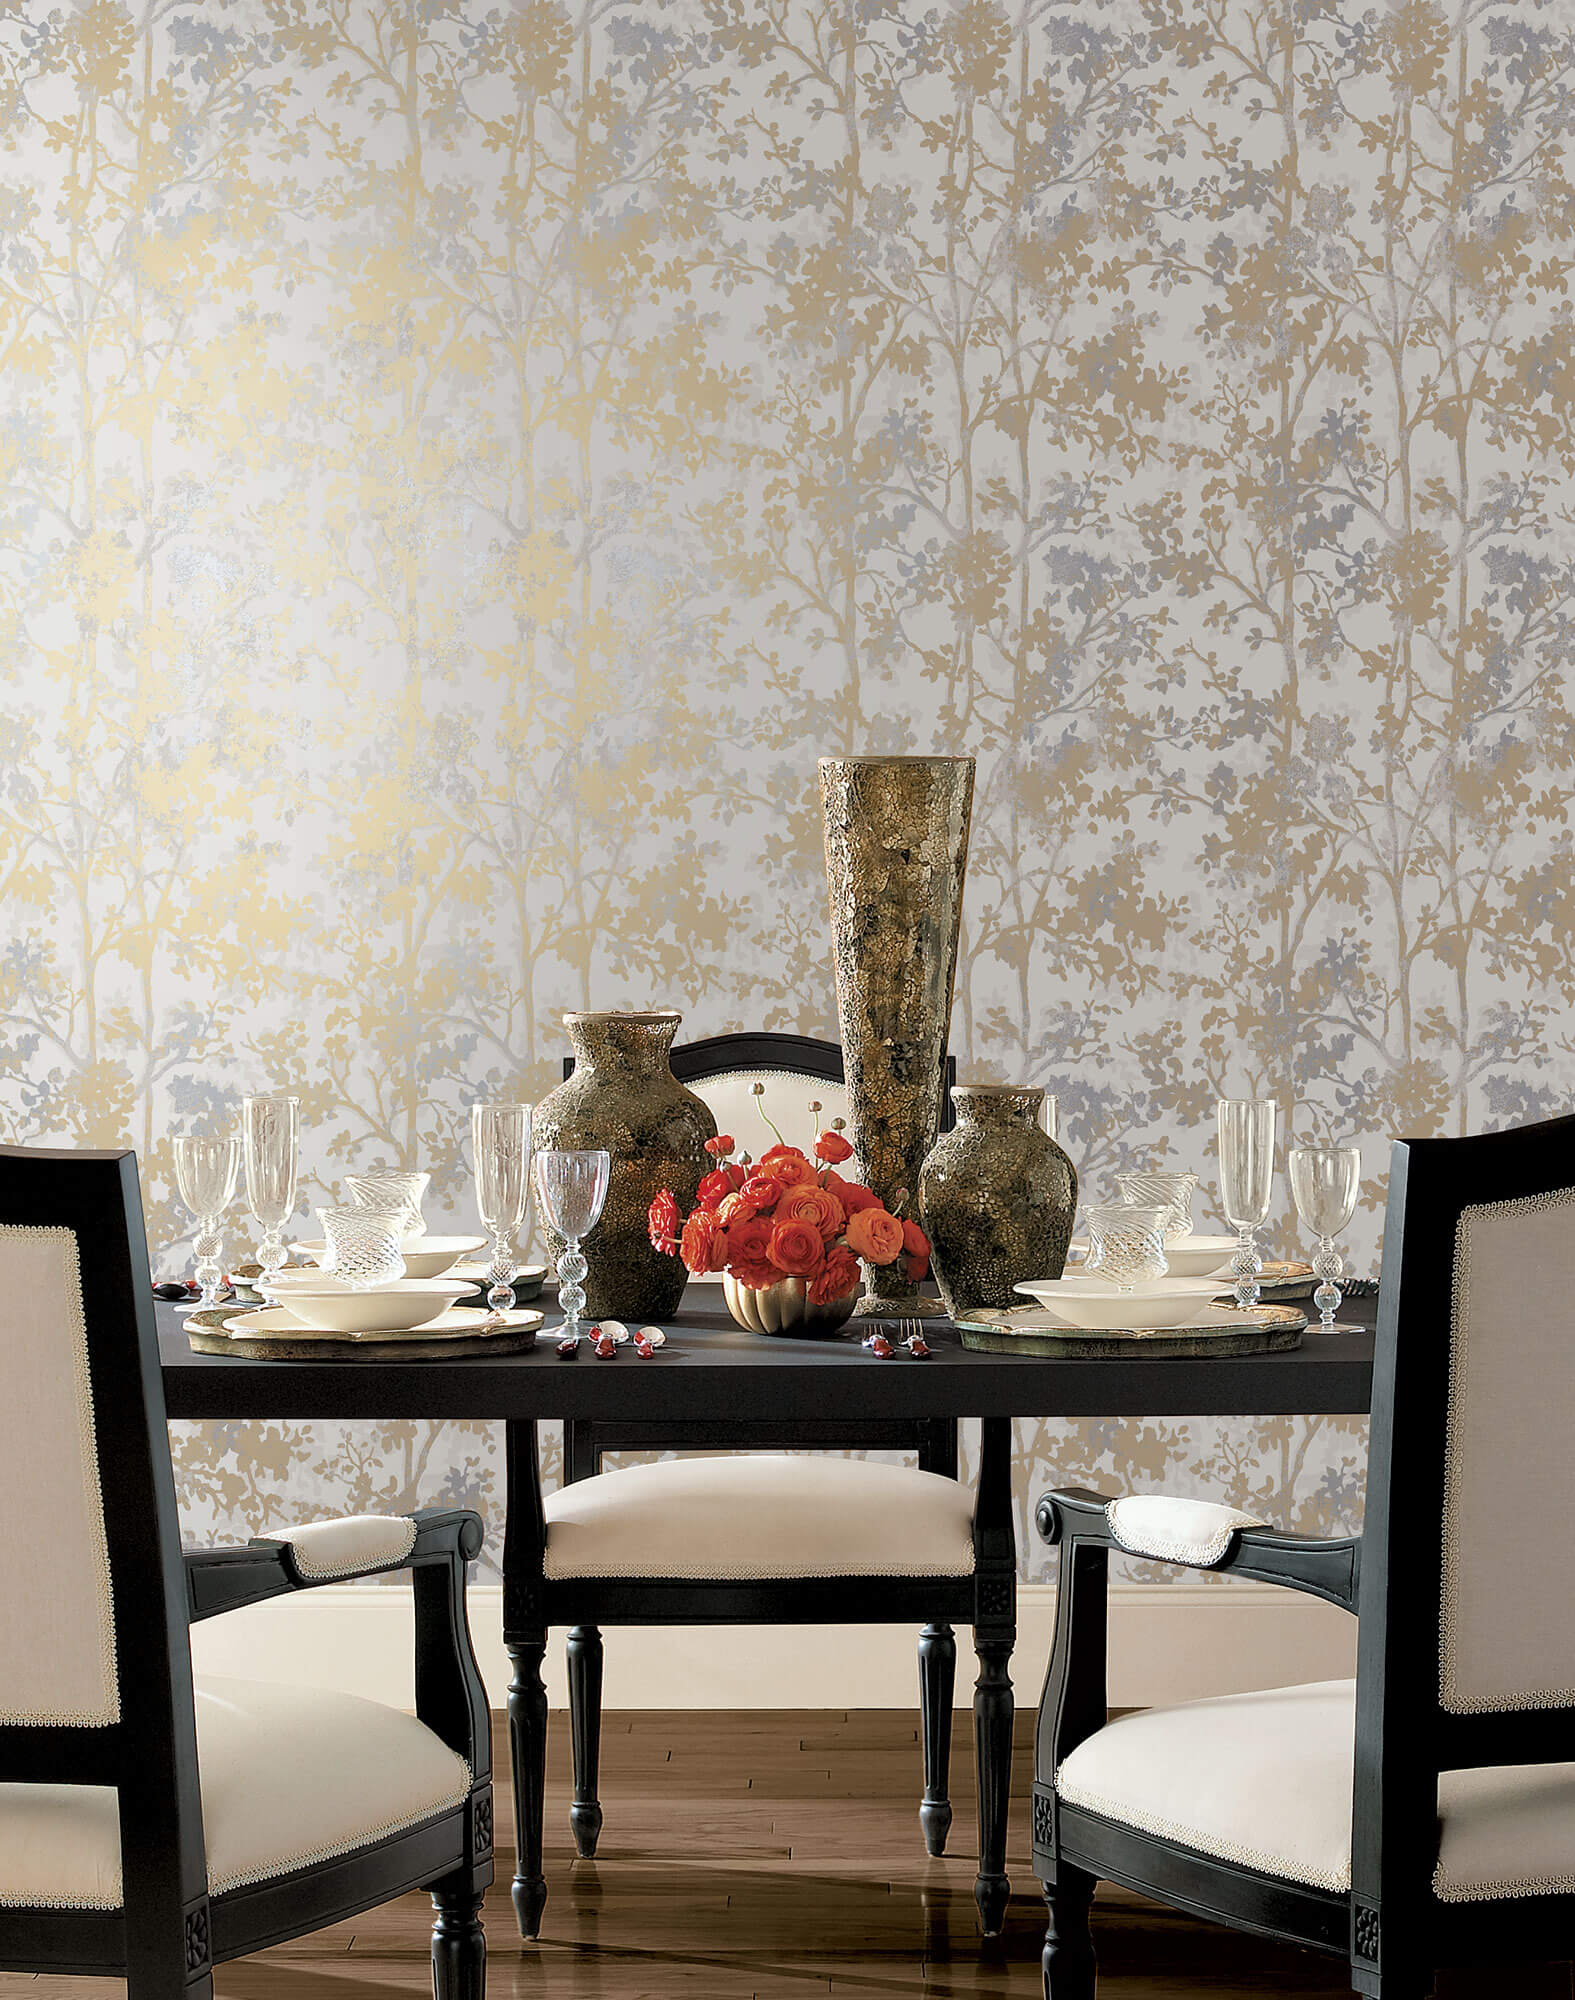 NW3583 Modern Metals Shimmering Foliage Wallpaper White Gold